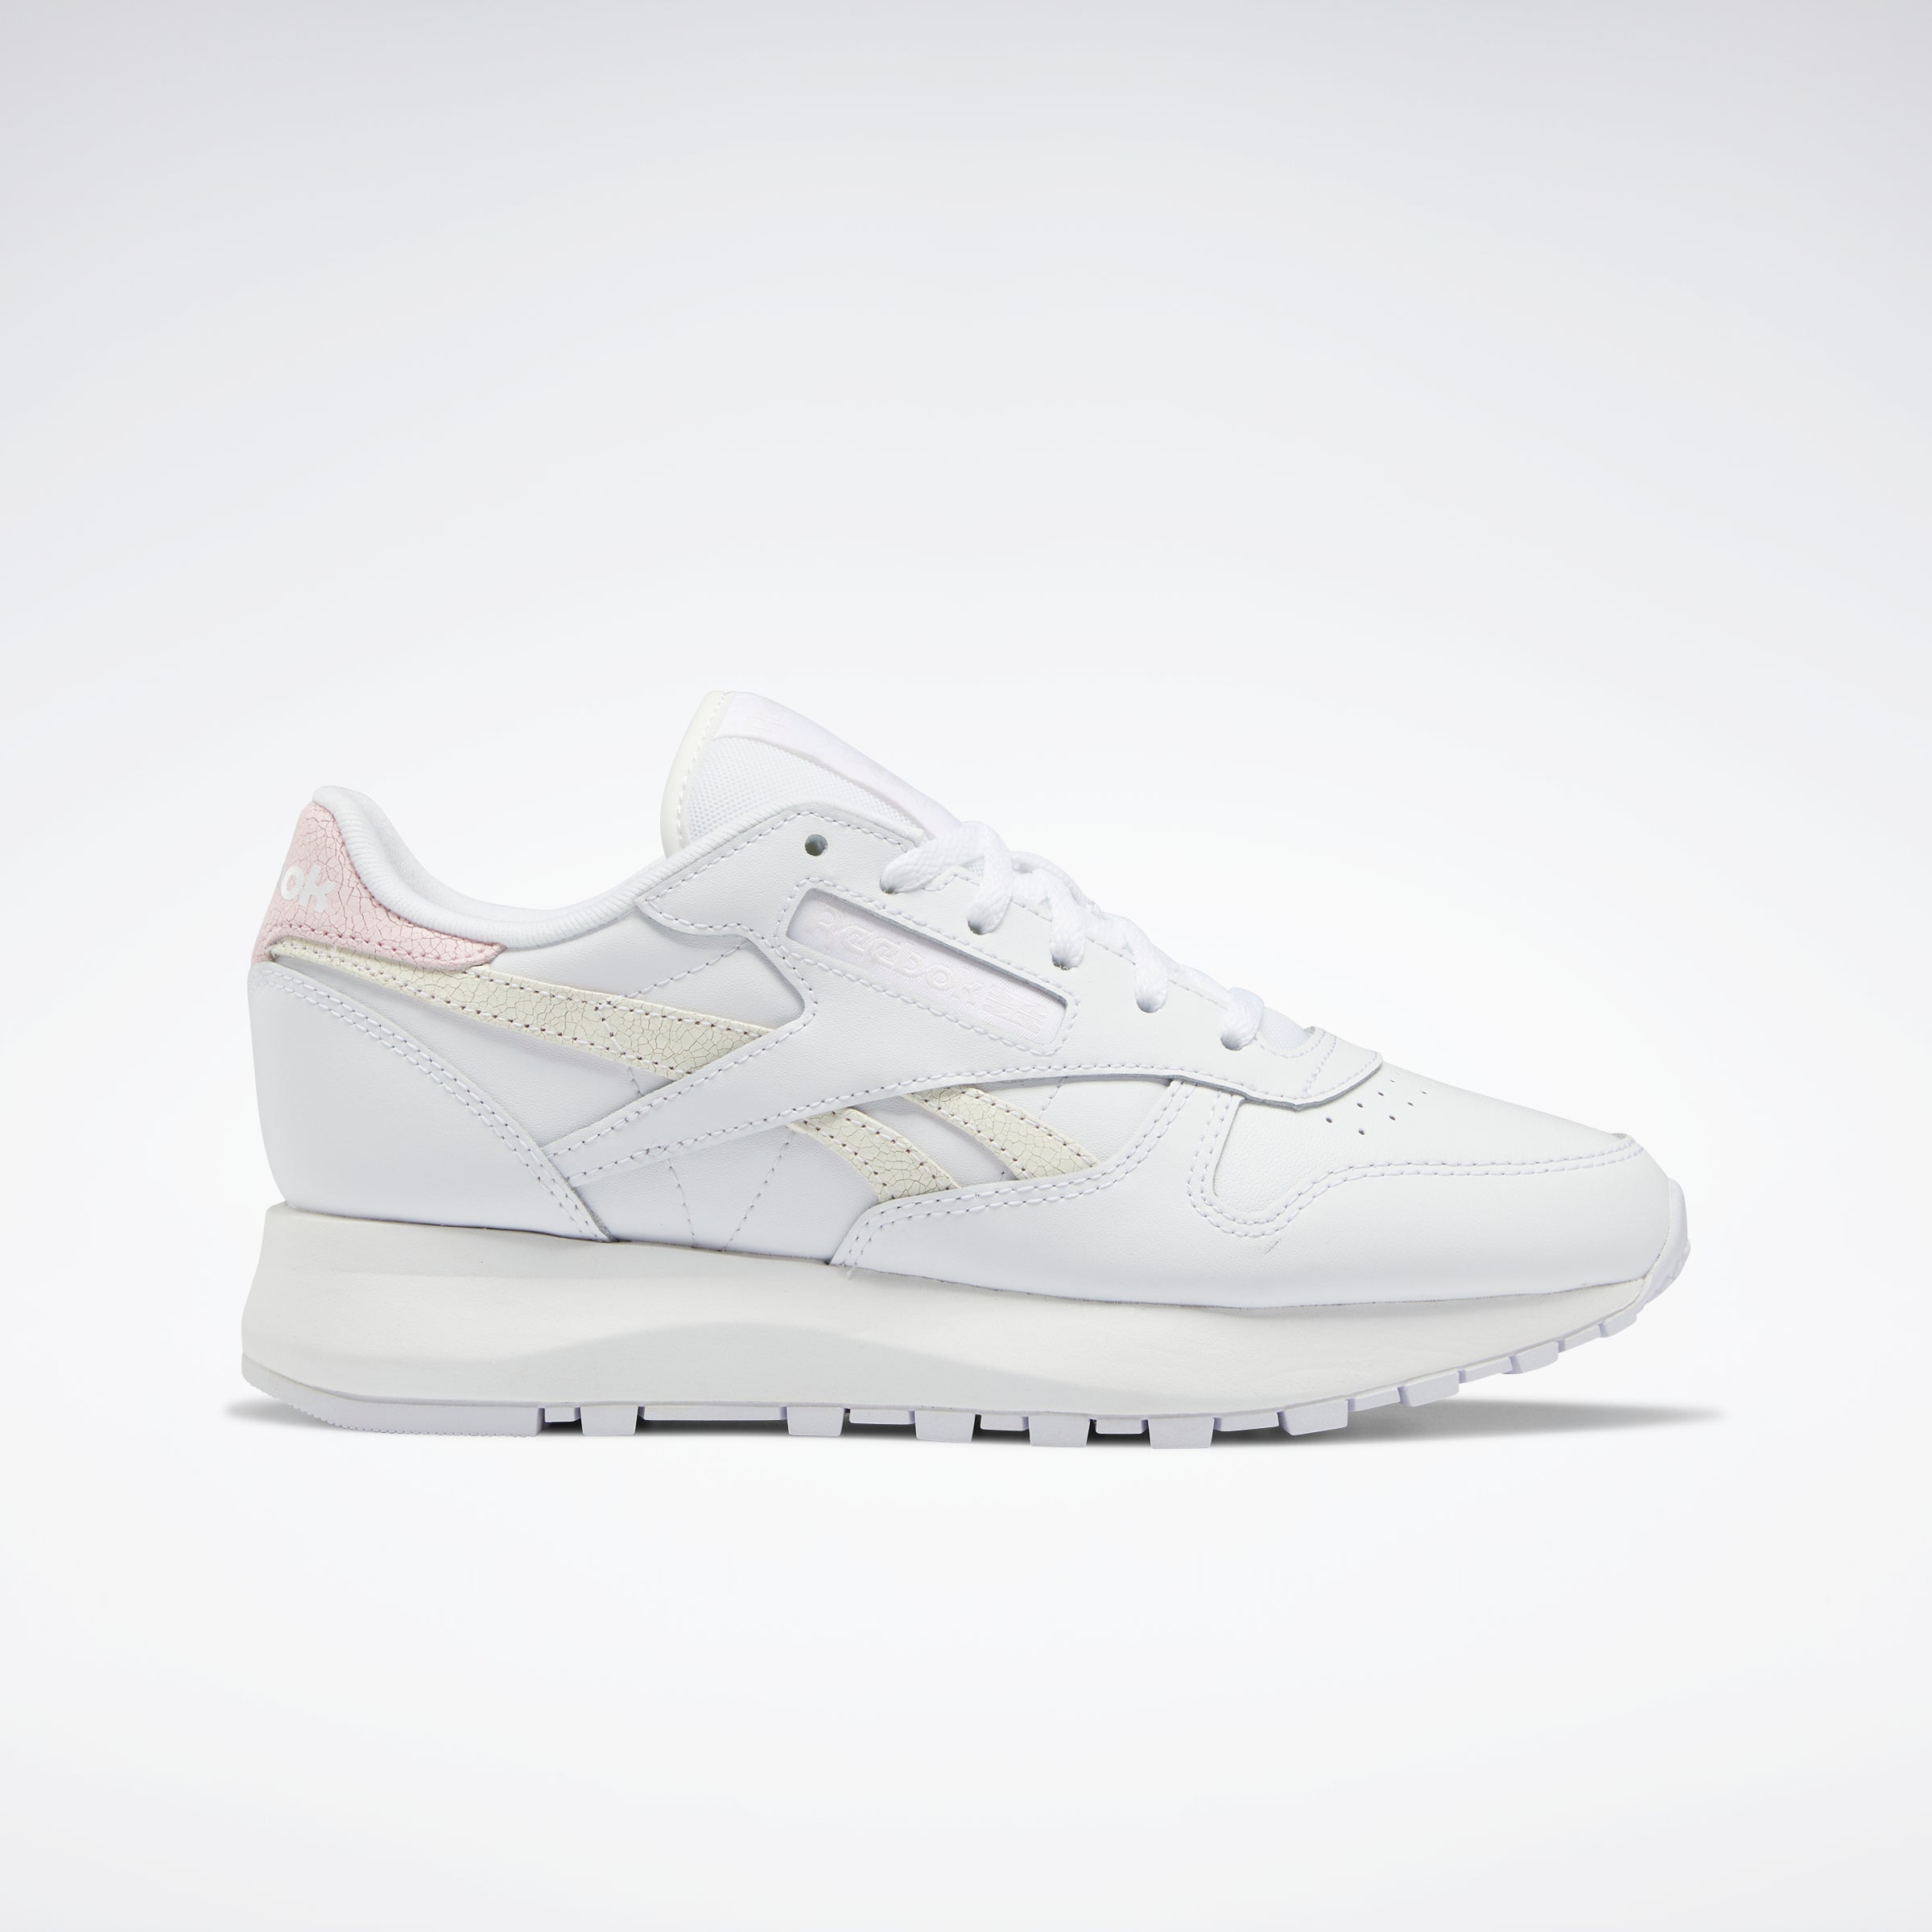 forbruge favor over Classic Leather SP Shoes White/White/Porcelain Pink – Reebok Australia